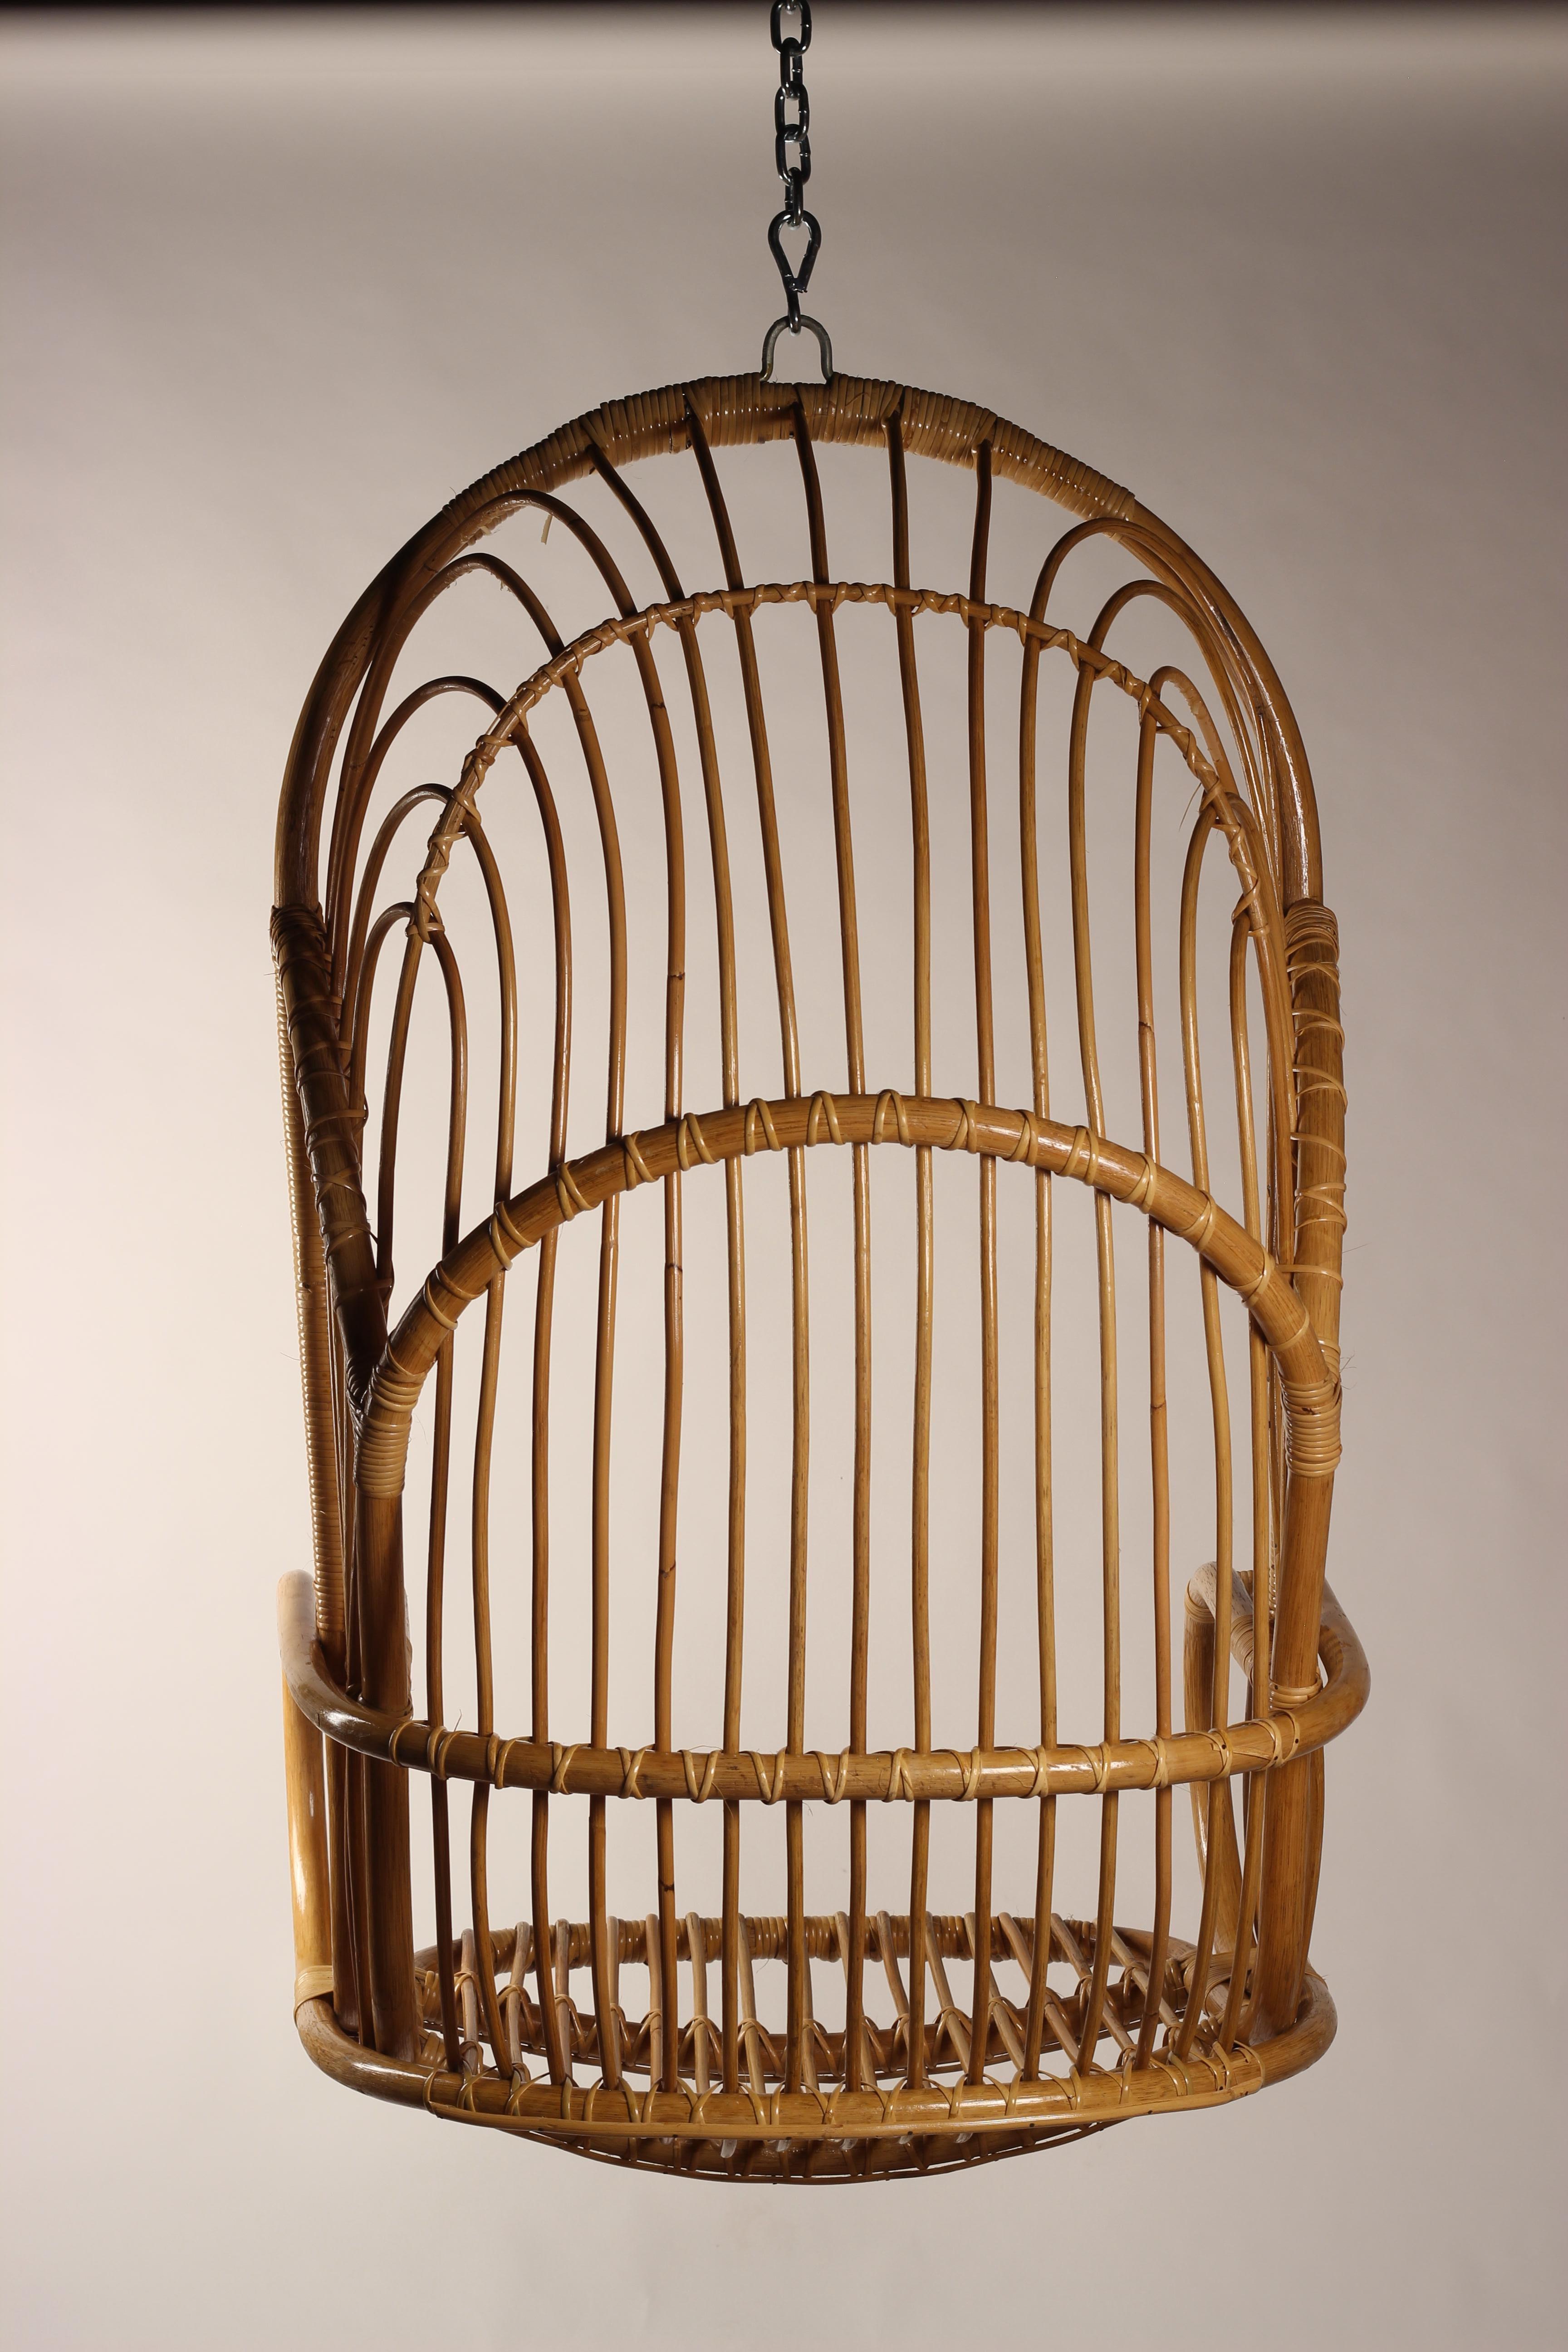 Boho Chic Style 1960’s Wicker and Cane Hanging Chair by Rohe Noordwolde For Sale 1